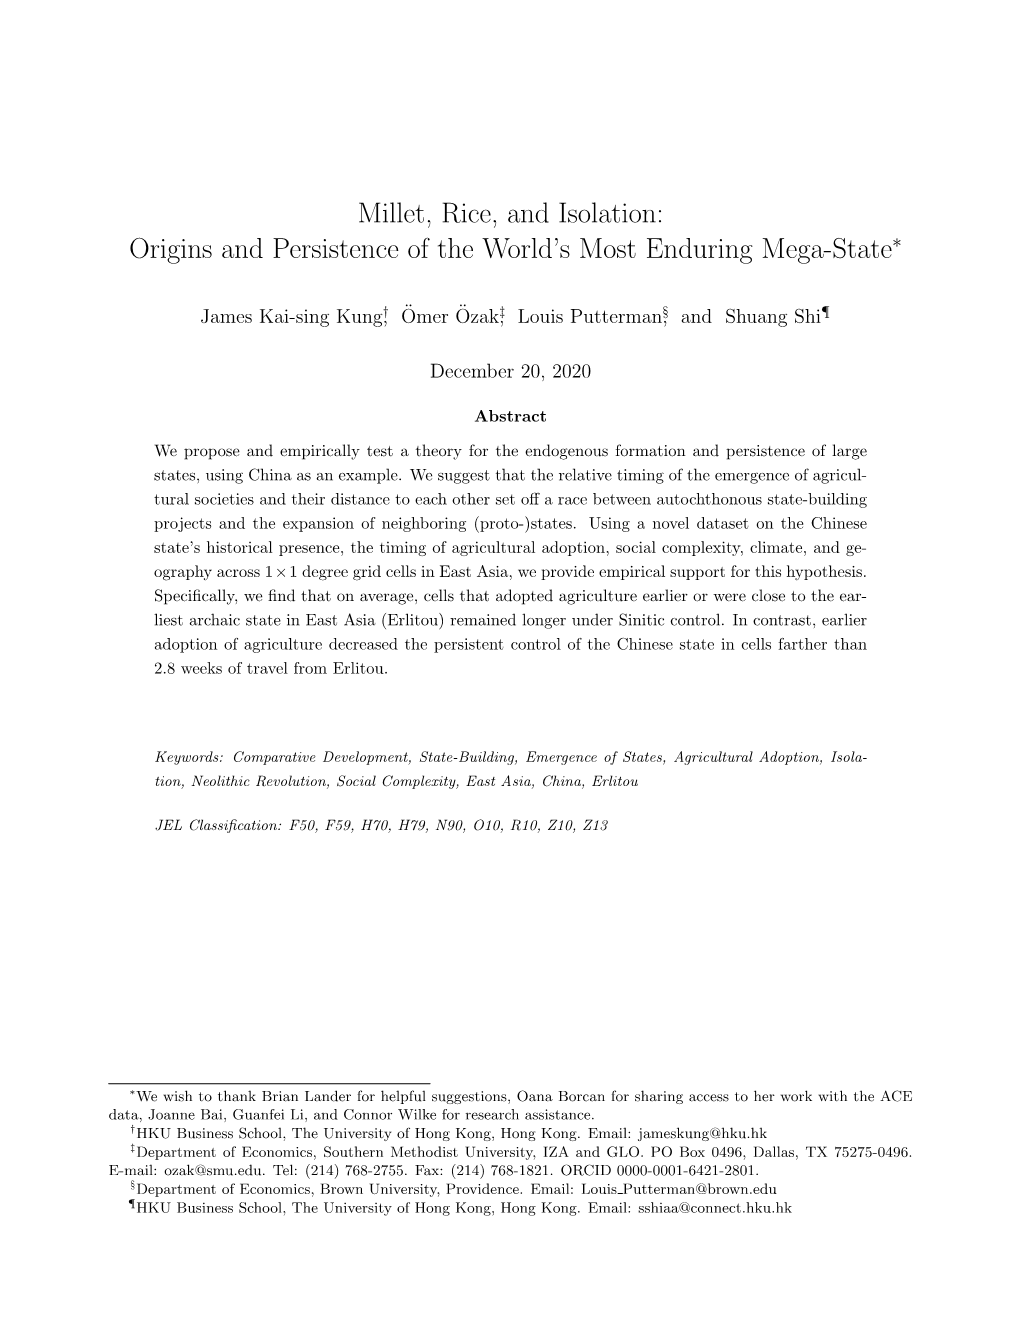 Millet, Rice, and Isolation: Origins and Persistence of the World’S Most Enduring Mega-State∗